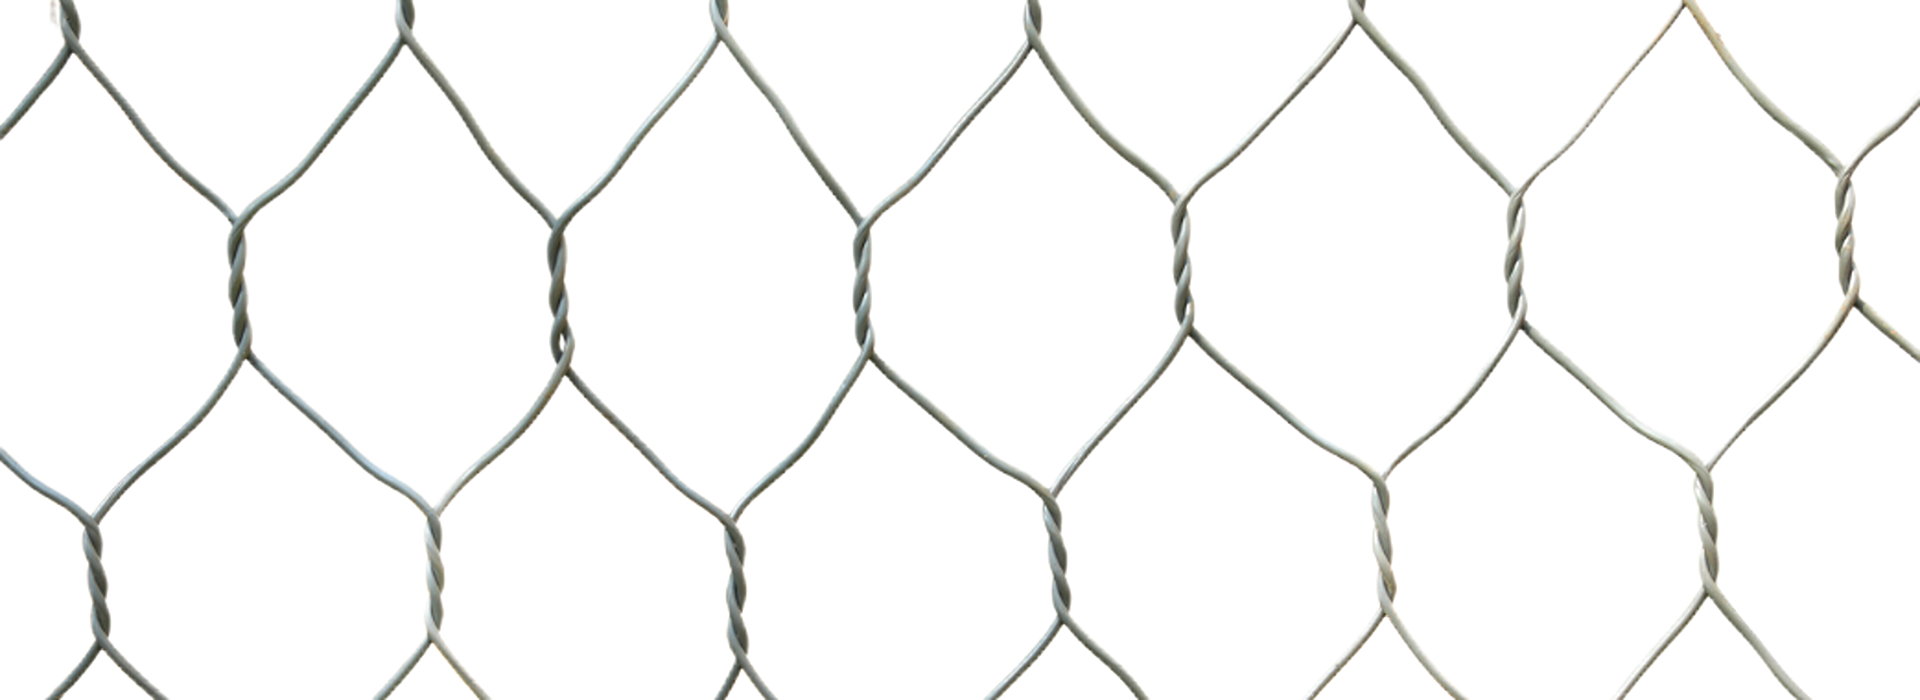 GSWR along with Hexagonal Double Twisted Wire mesh